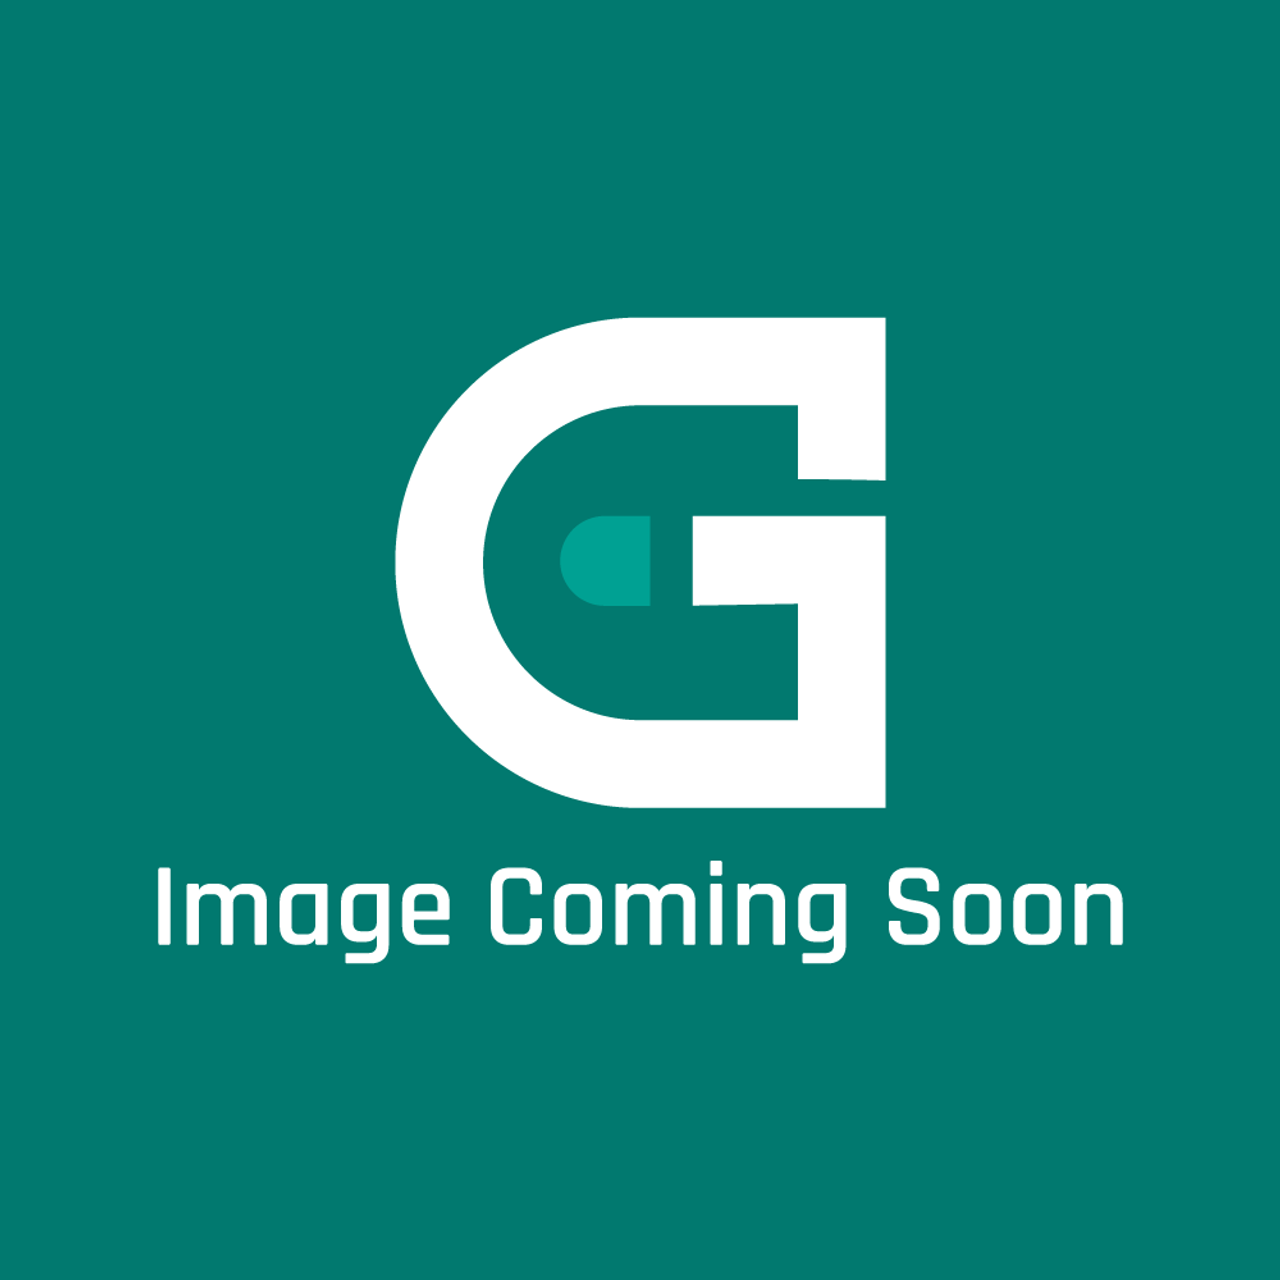 Delfield 020005555 - Fttg Short Product To Pu Mp - Image Coming Soon!